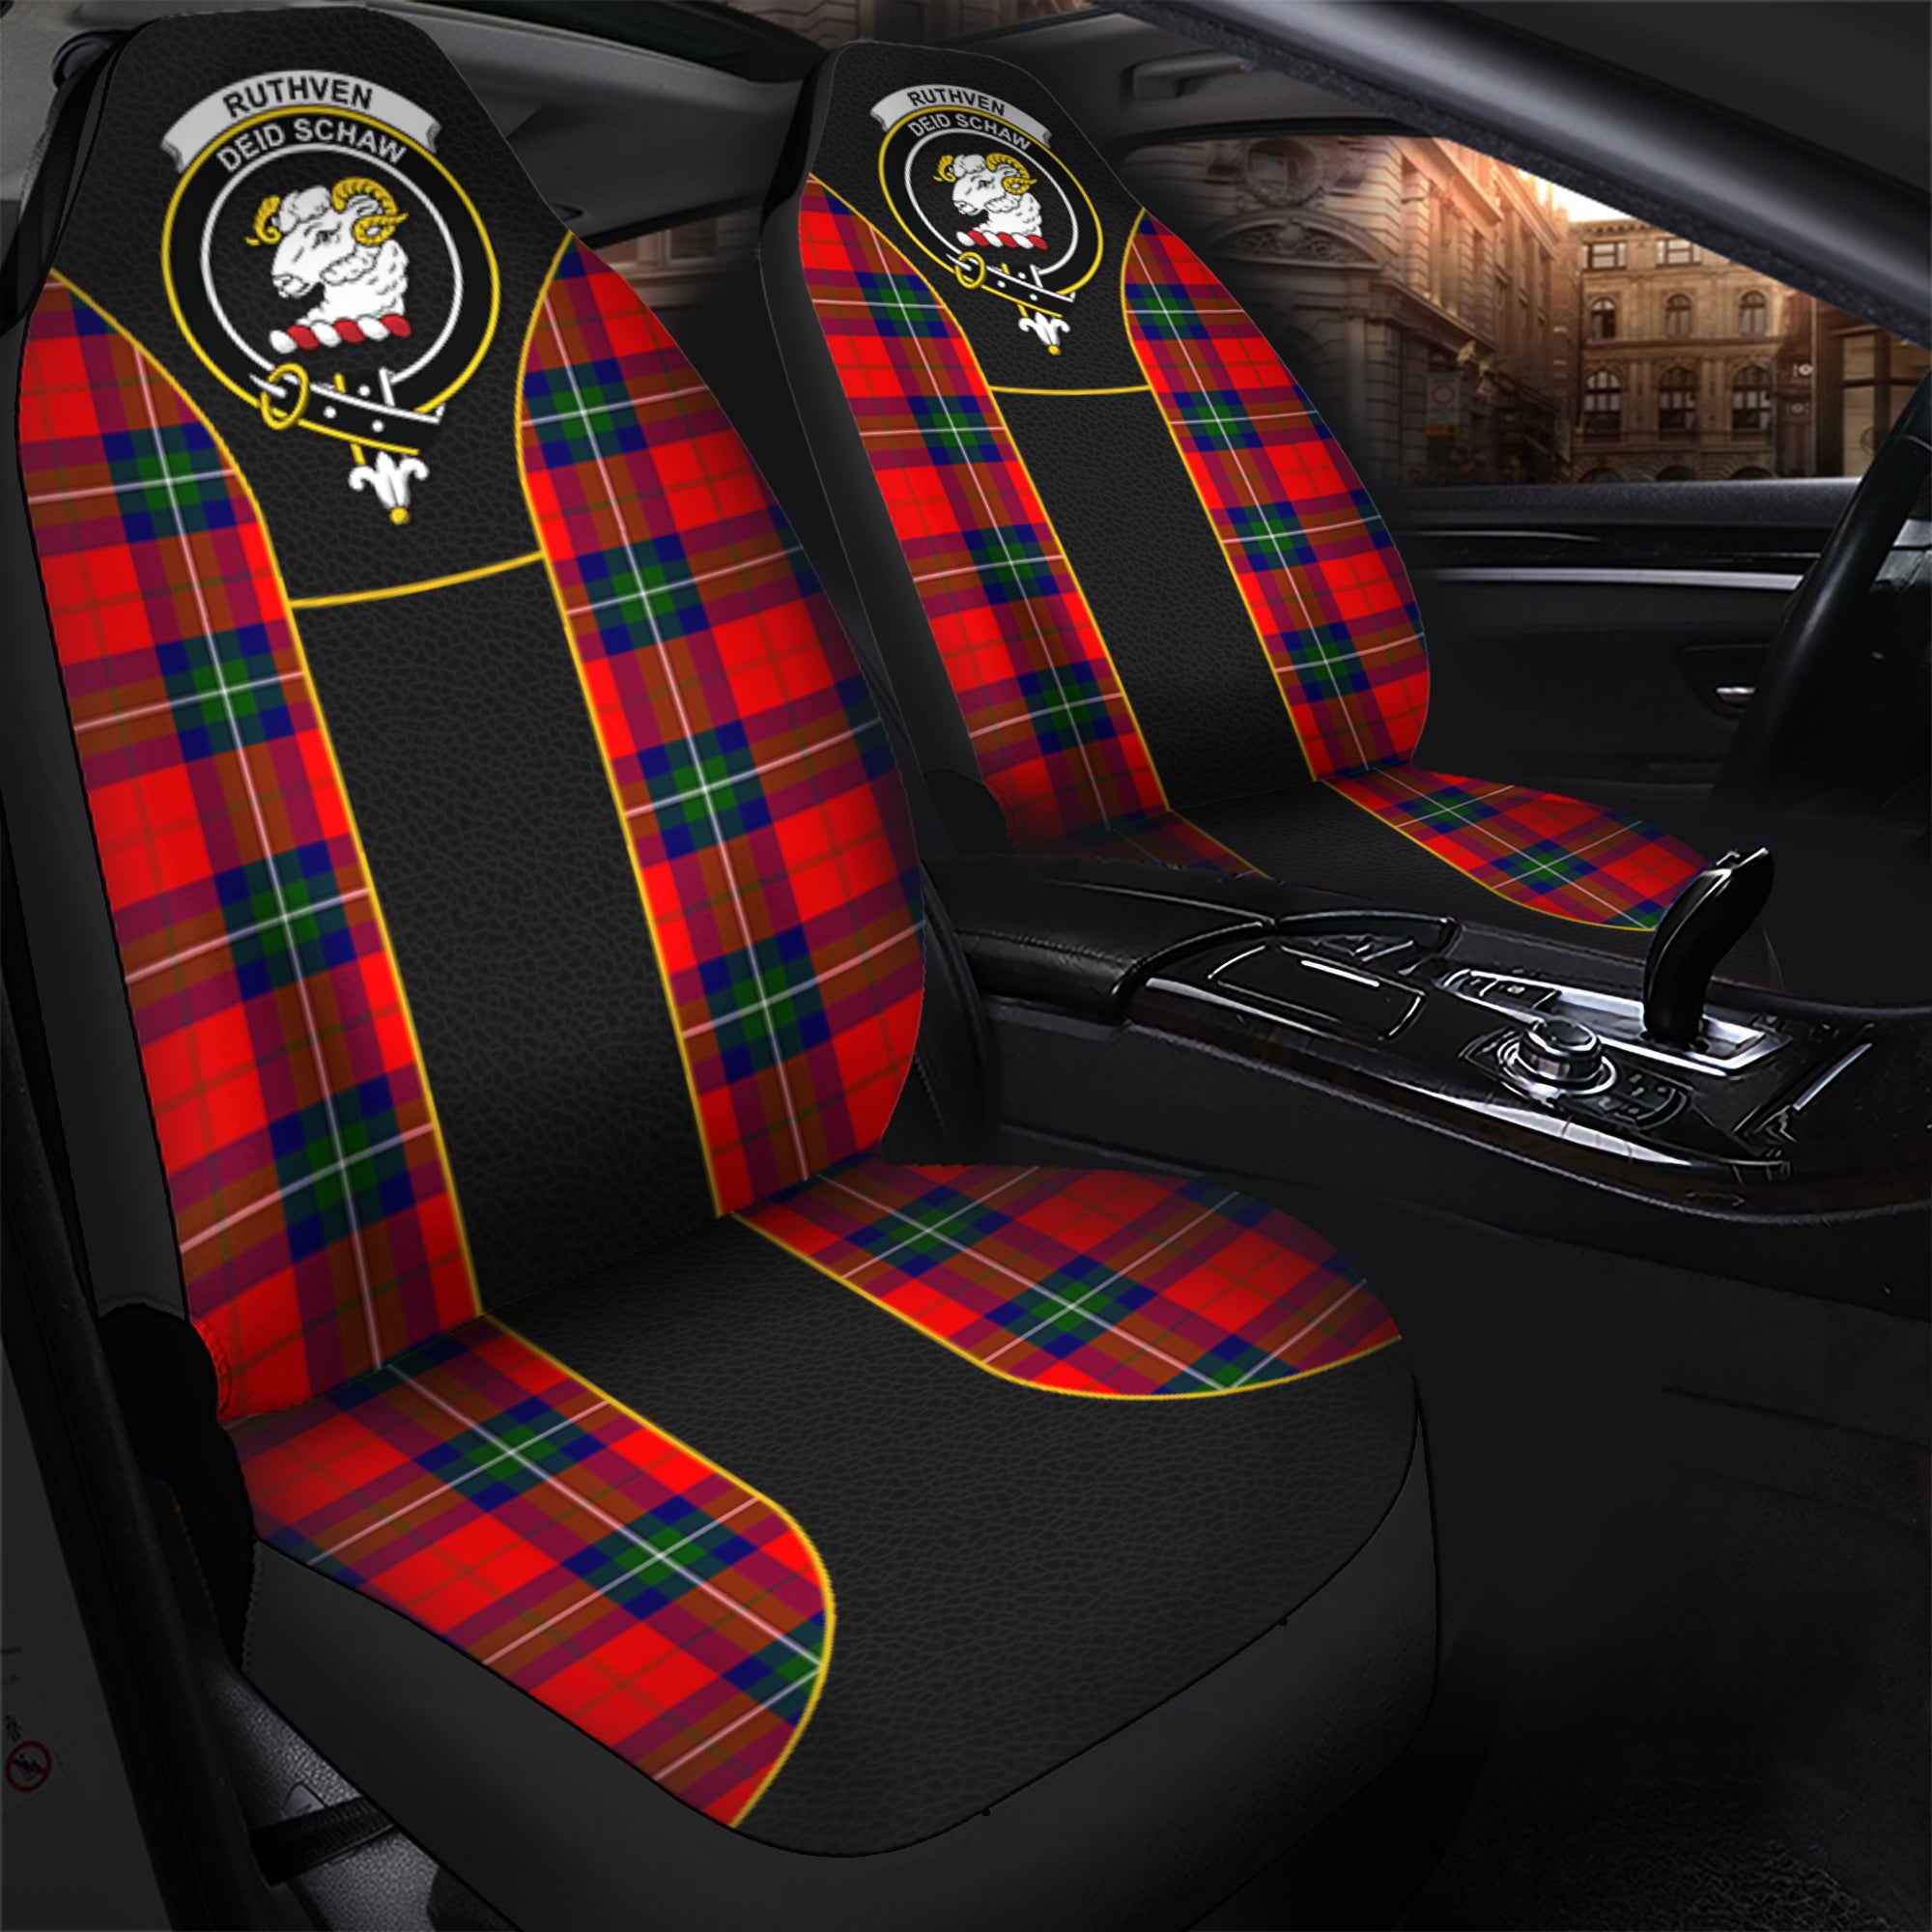 scottish-ruthven-modern-tartan-crest-car-seat-cover-special-style